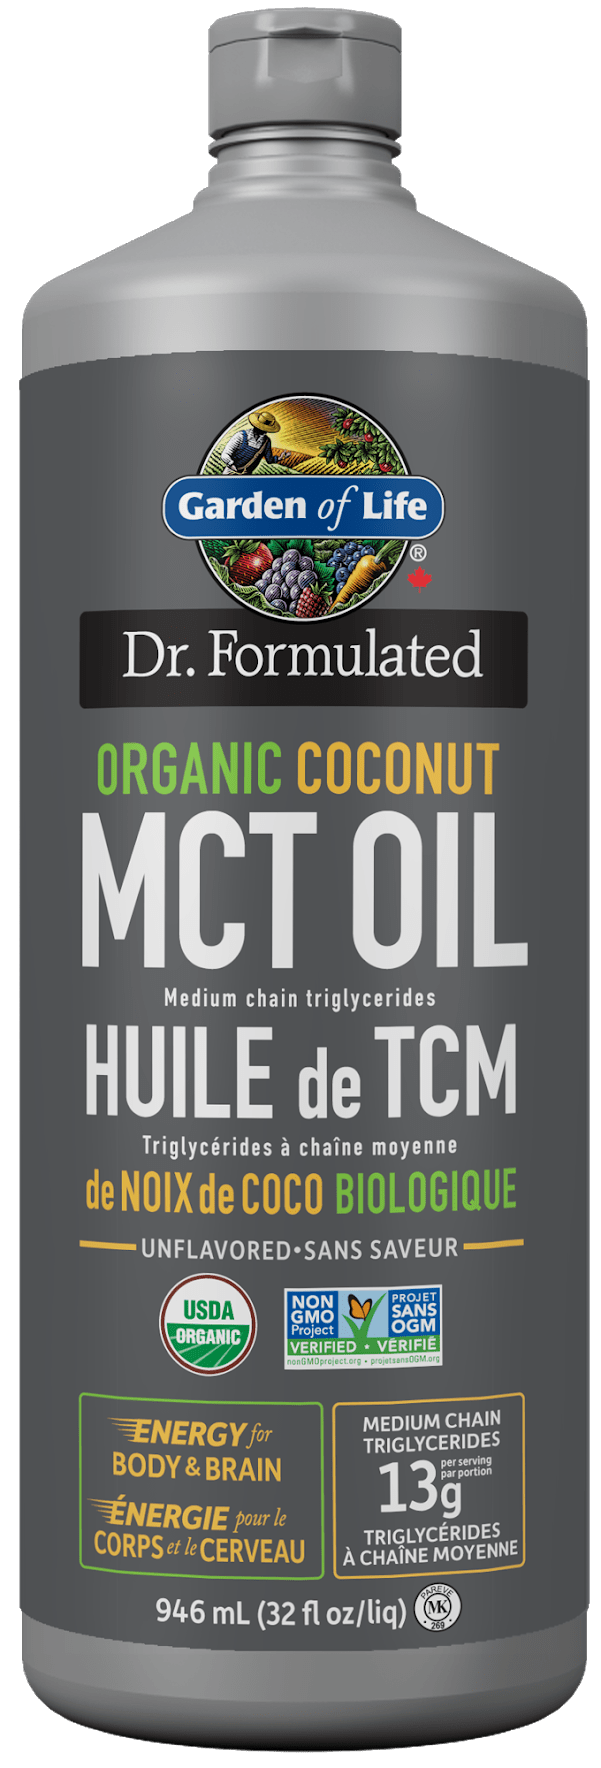 Garden of Life Dr. Formulated Organic Coconut MCT Oil 946ml